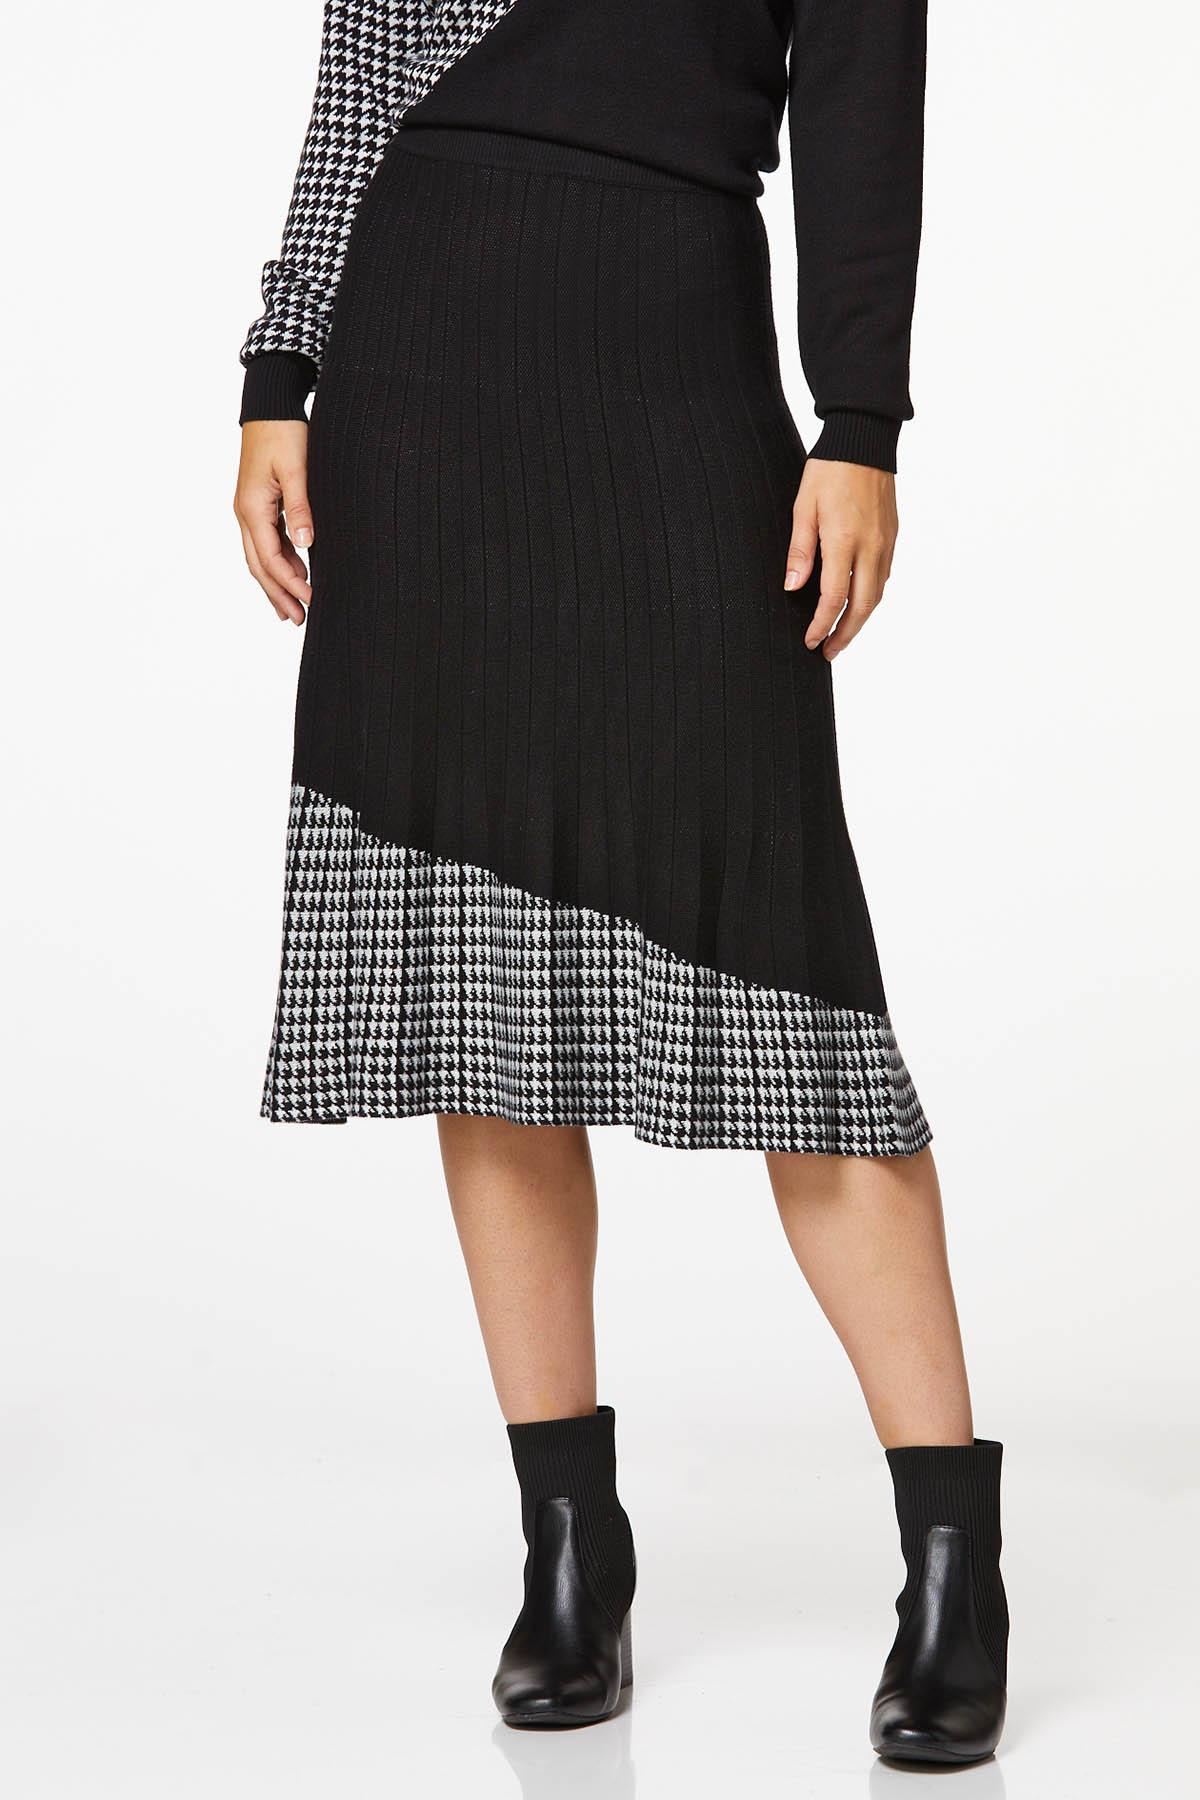 Colorblock Houndstooth Skirt